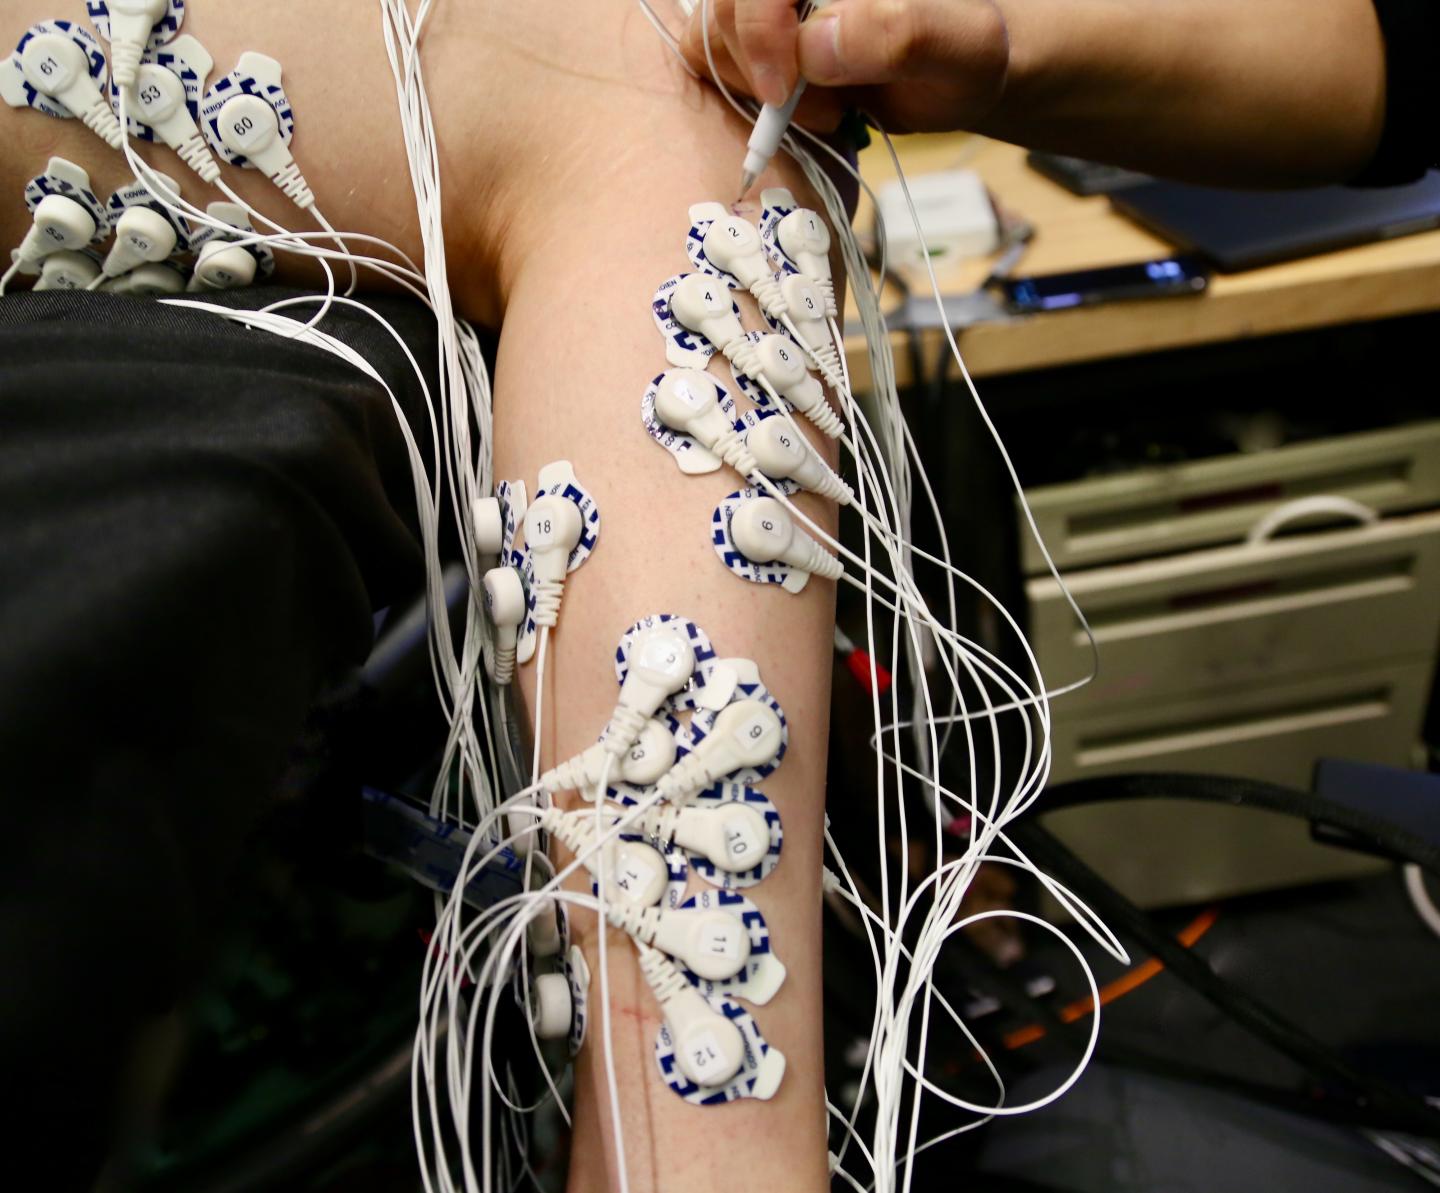 Neuromuscular mapping